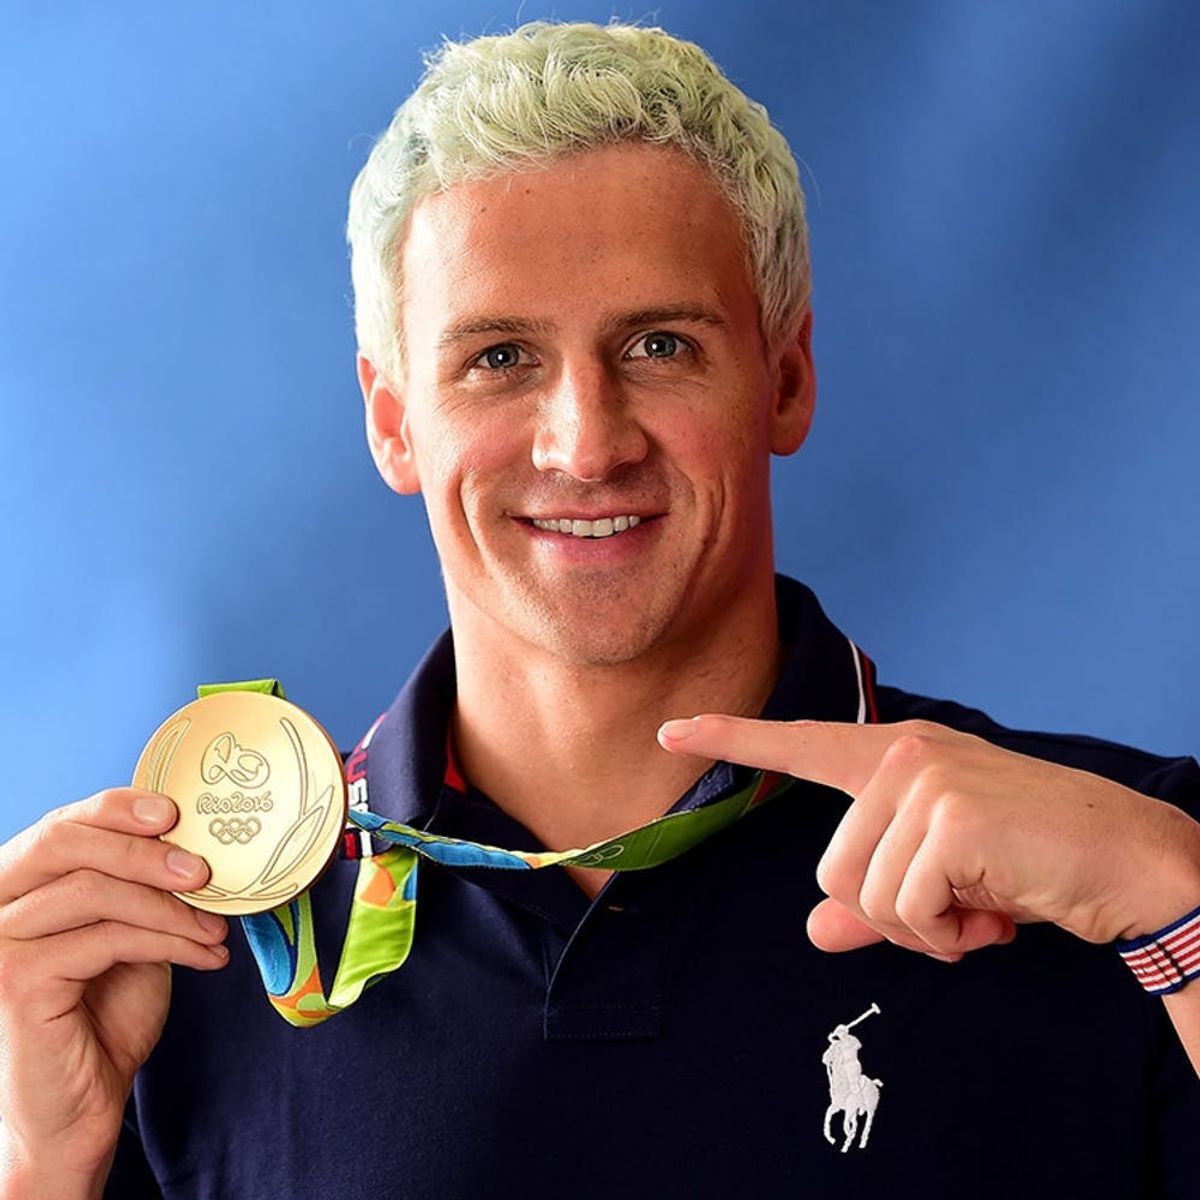 What Exactly Is Going on With Ryan Lochte RN?